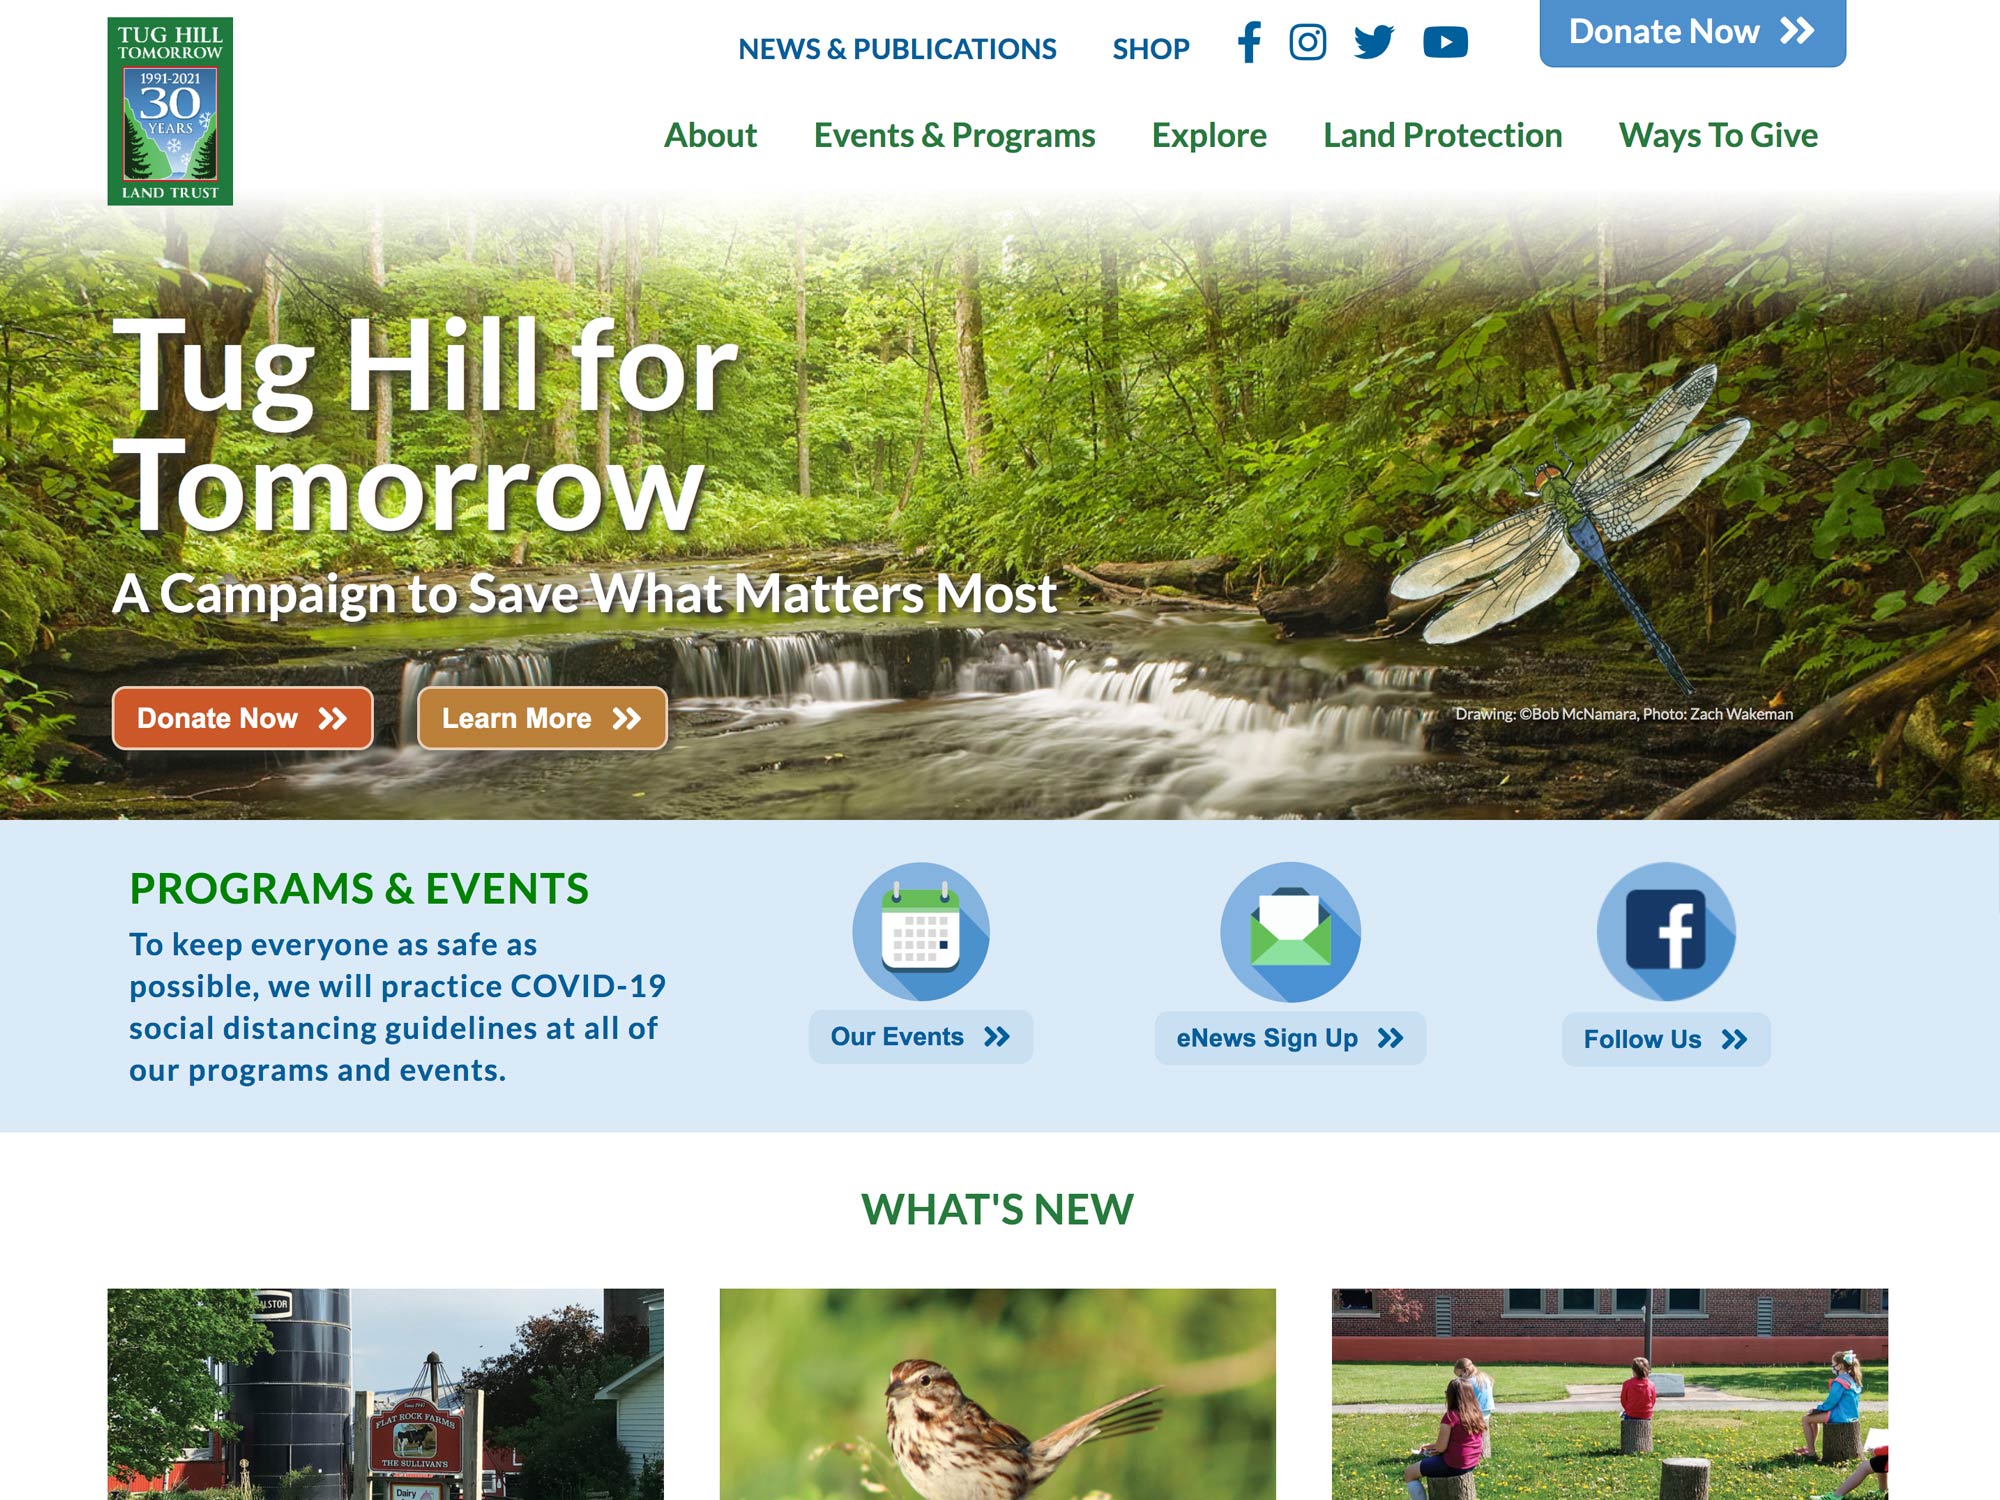 website homepage highlight three year capital campaign